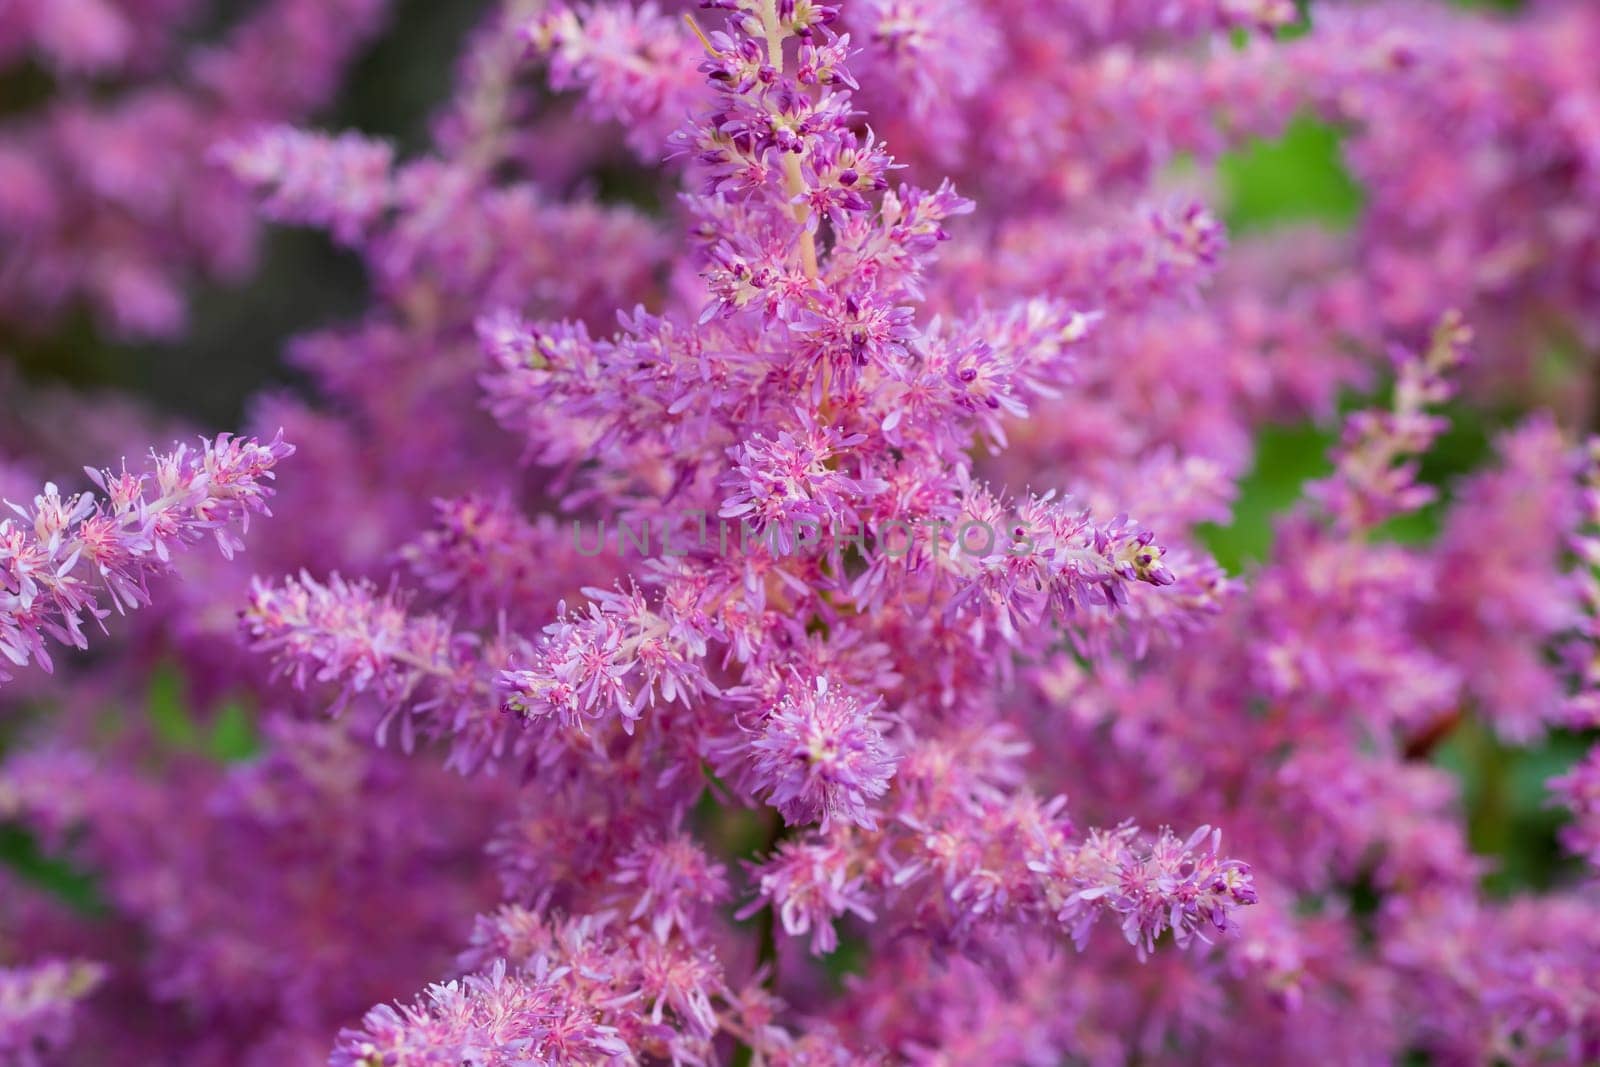 Blooming pink astilbes in a flower bed in the garden, close-up.